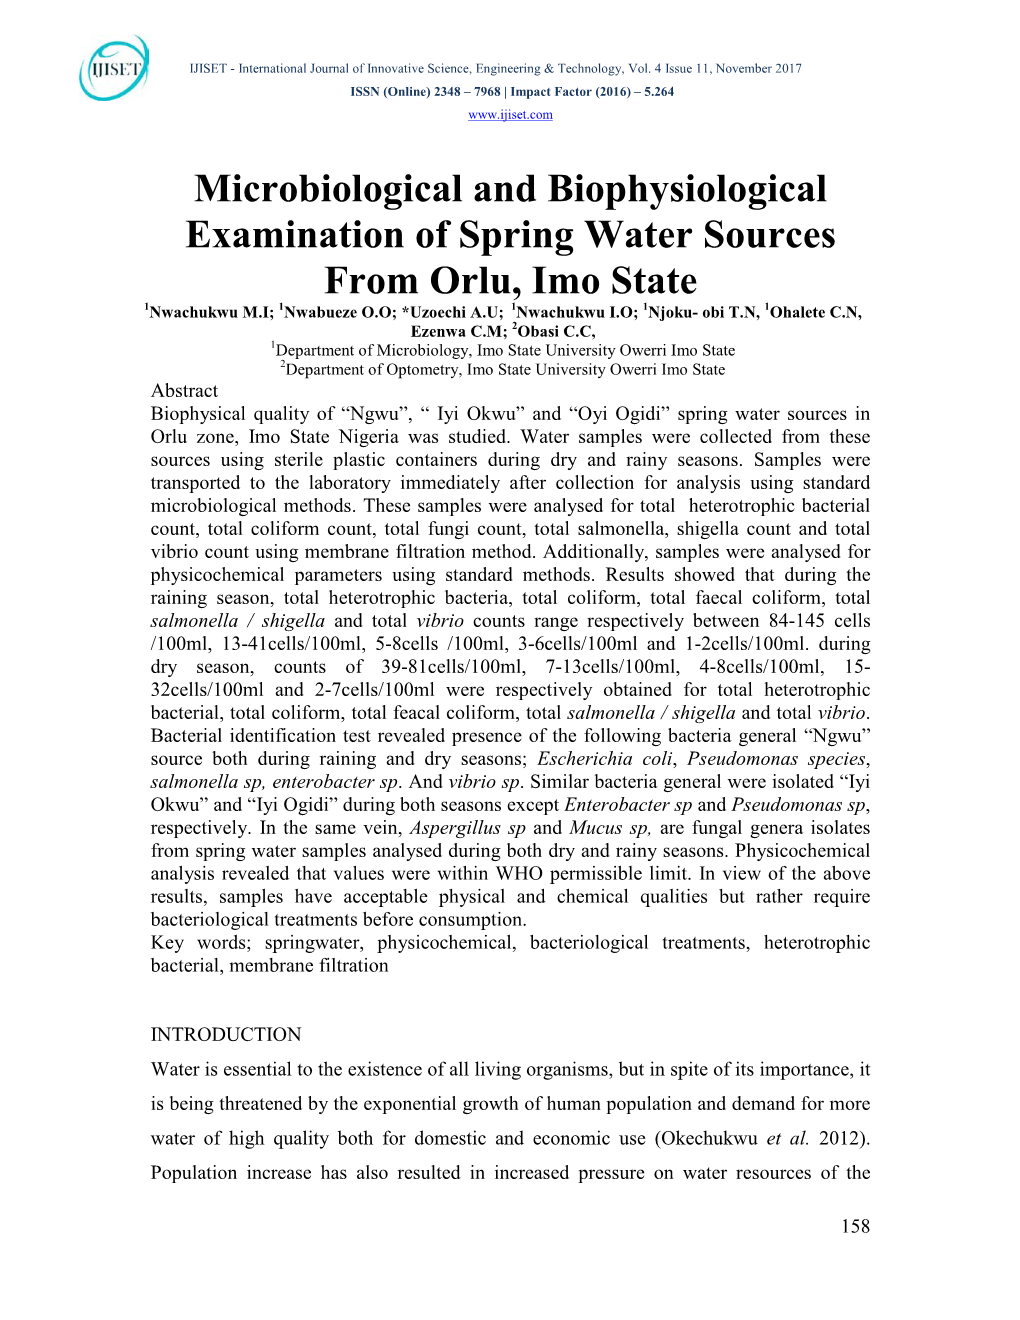 Microbiological and Biophysiological Examination of Spring Water